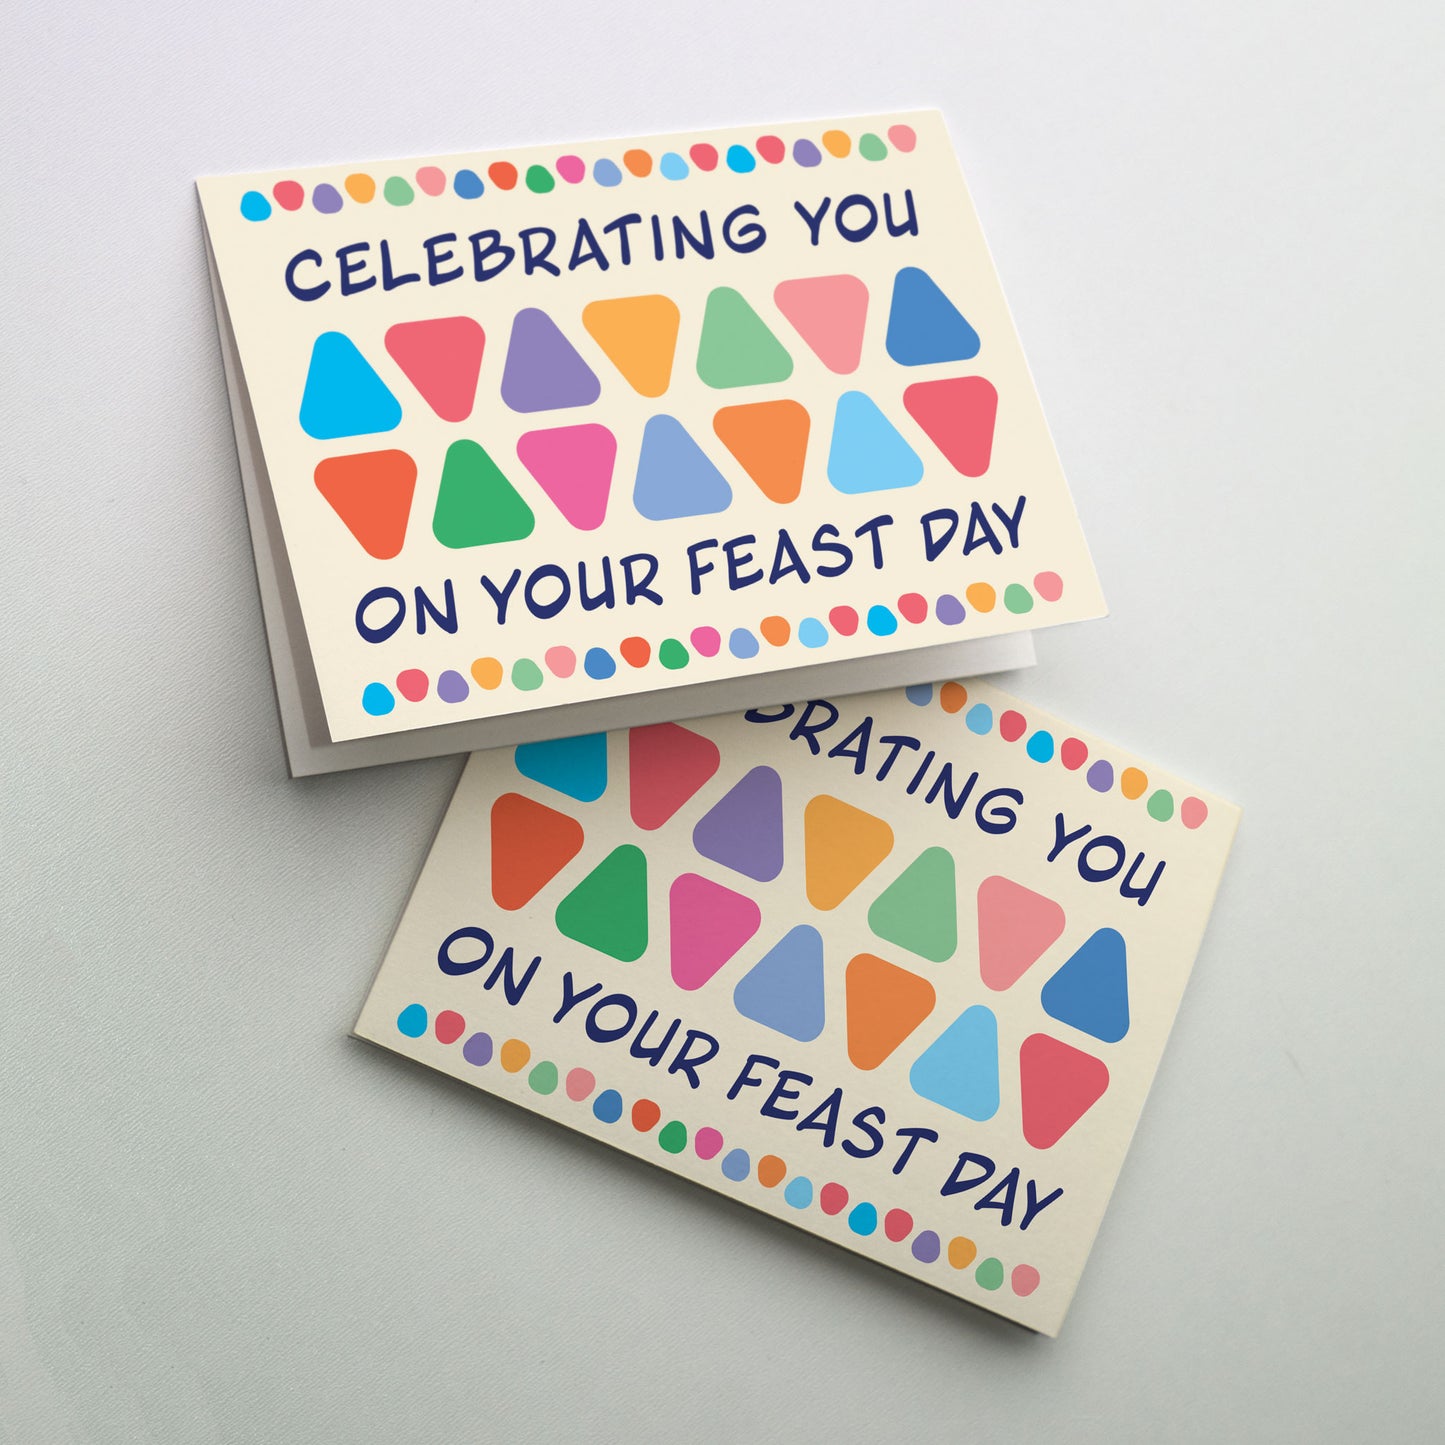 Celebrating You on Your Feast Day - Feast Day Card